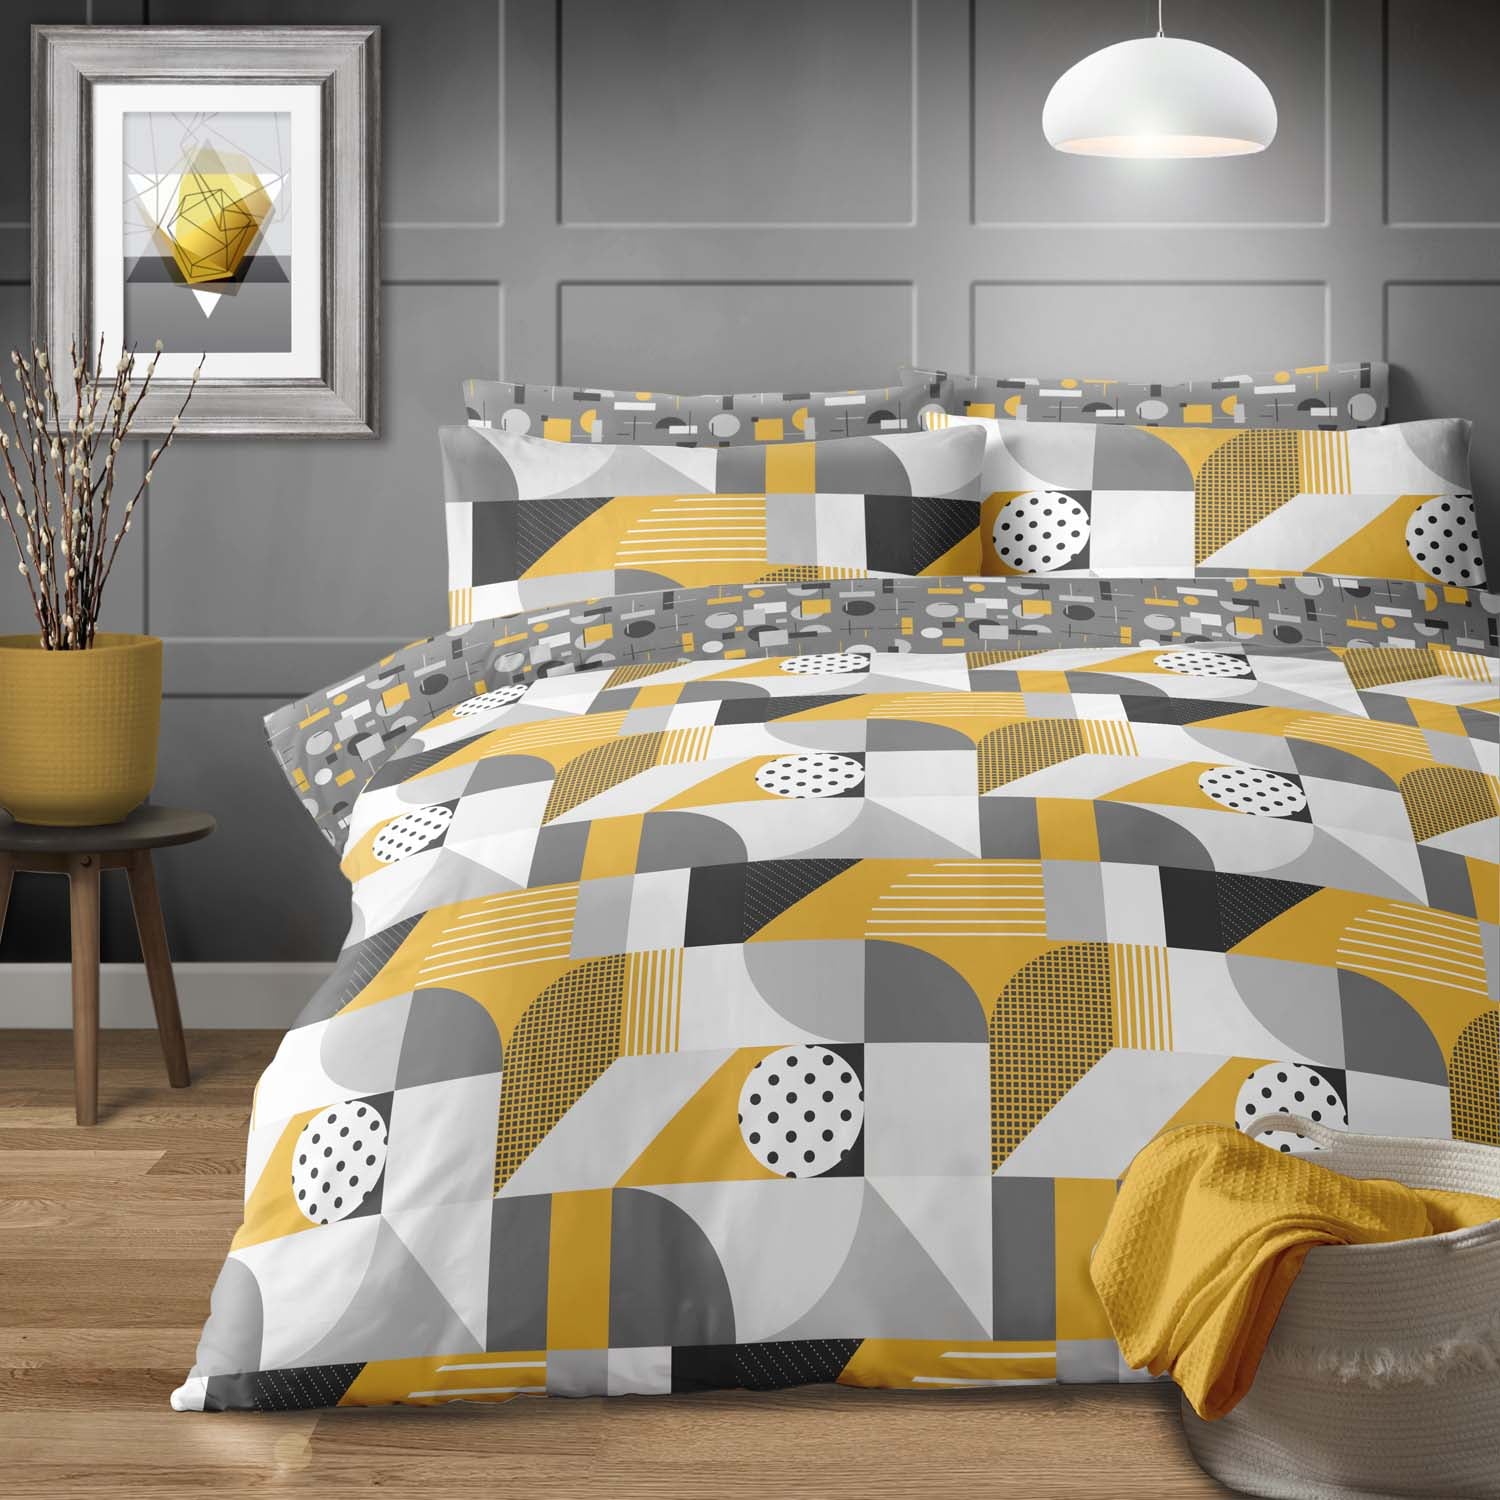  The Home Mid Century Duvet Cover Set 1 Shaws Department Stores